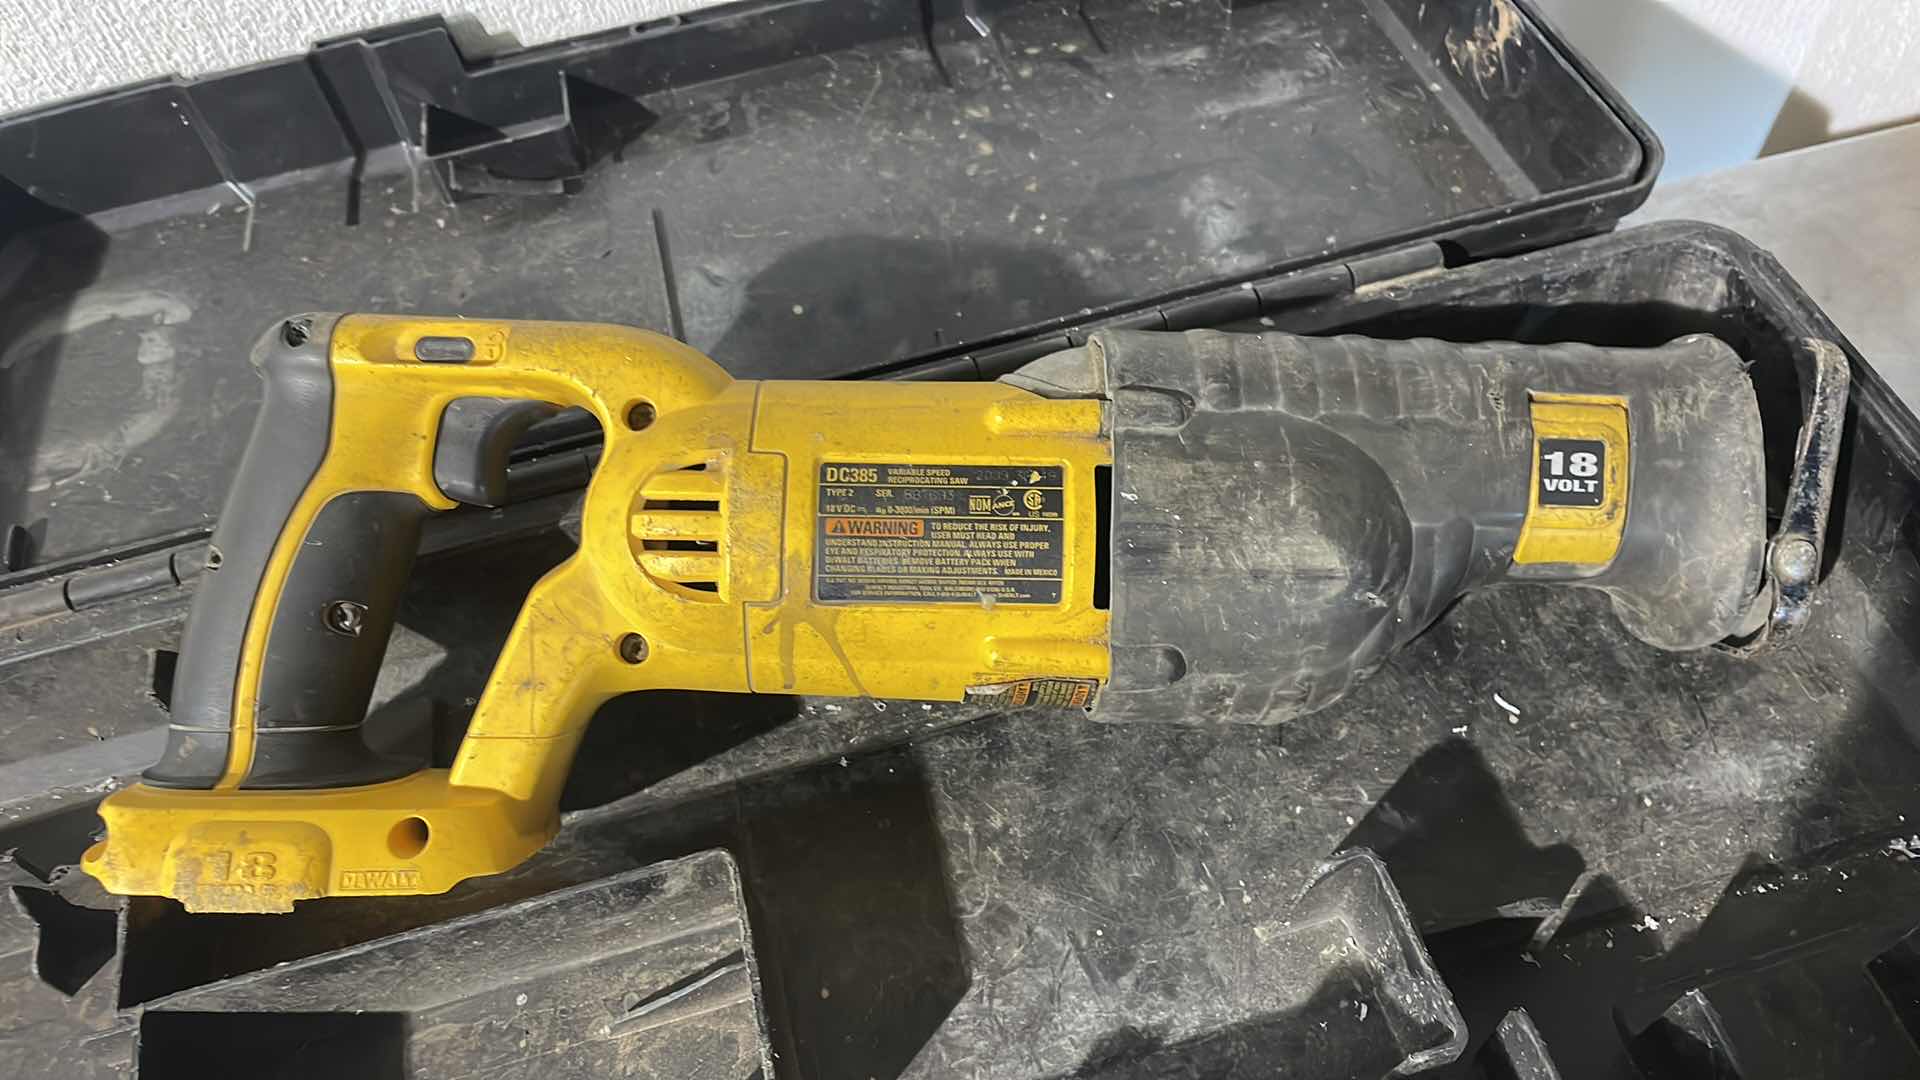 Photo 3 of DEWALT DC385 18V VARIABLE SPEED RECIPROCATING SAW IN CASE NO BATTERY TESTED WORKING